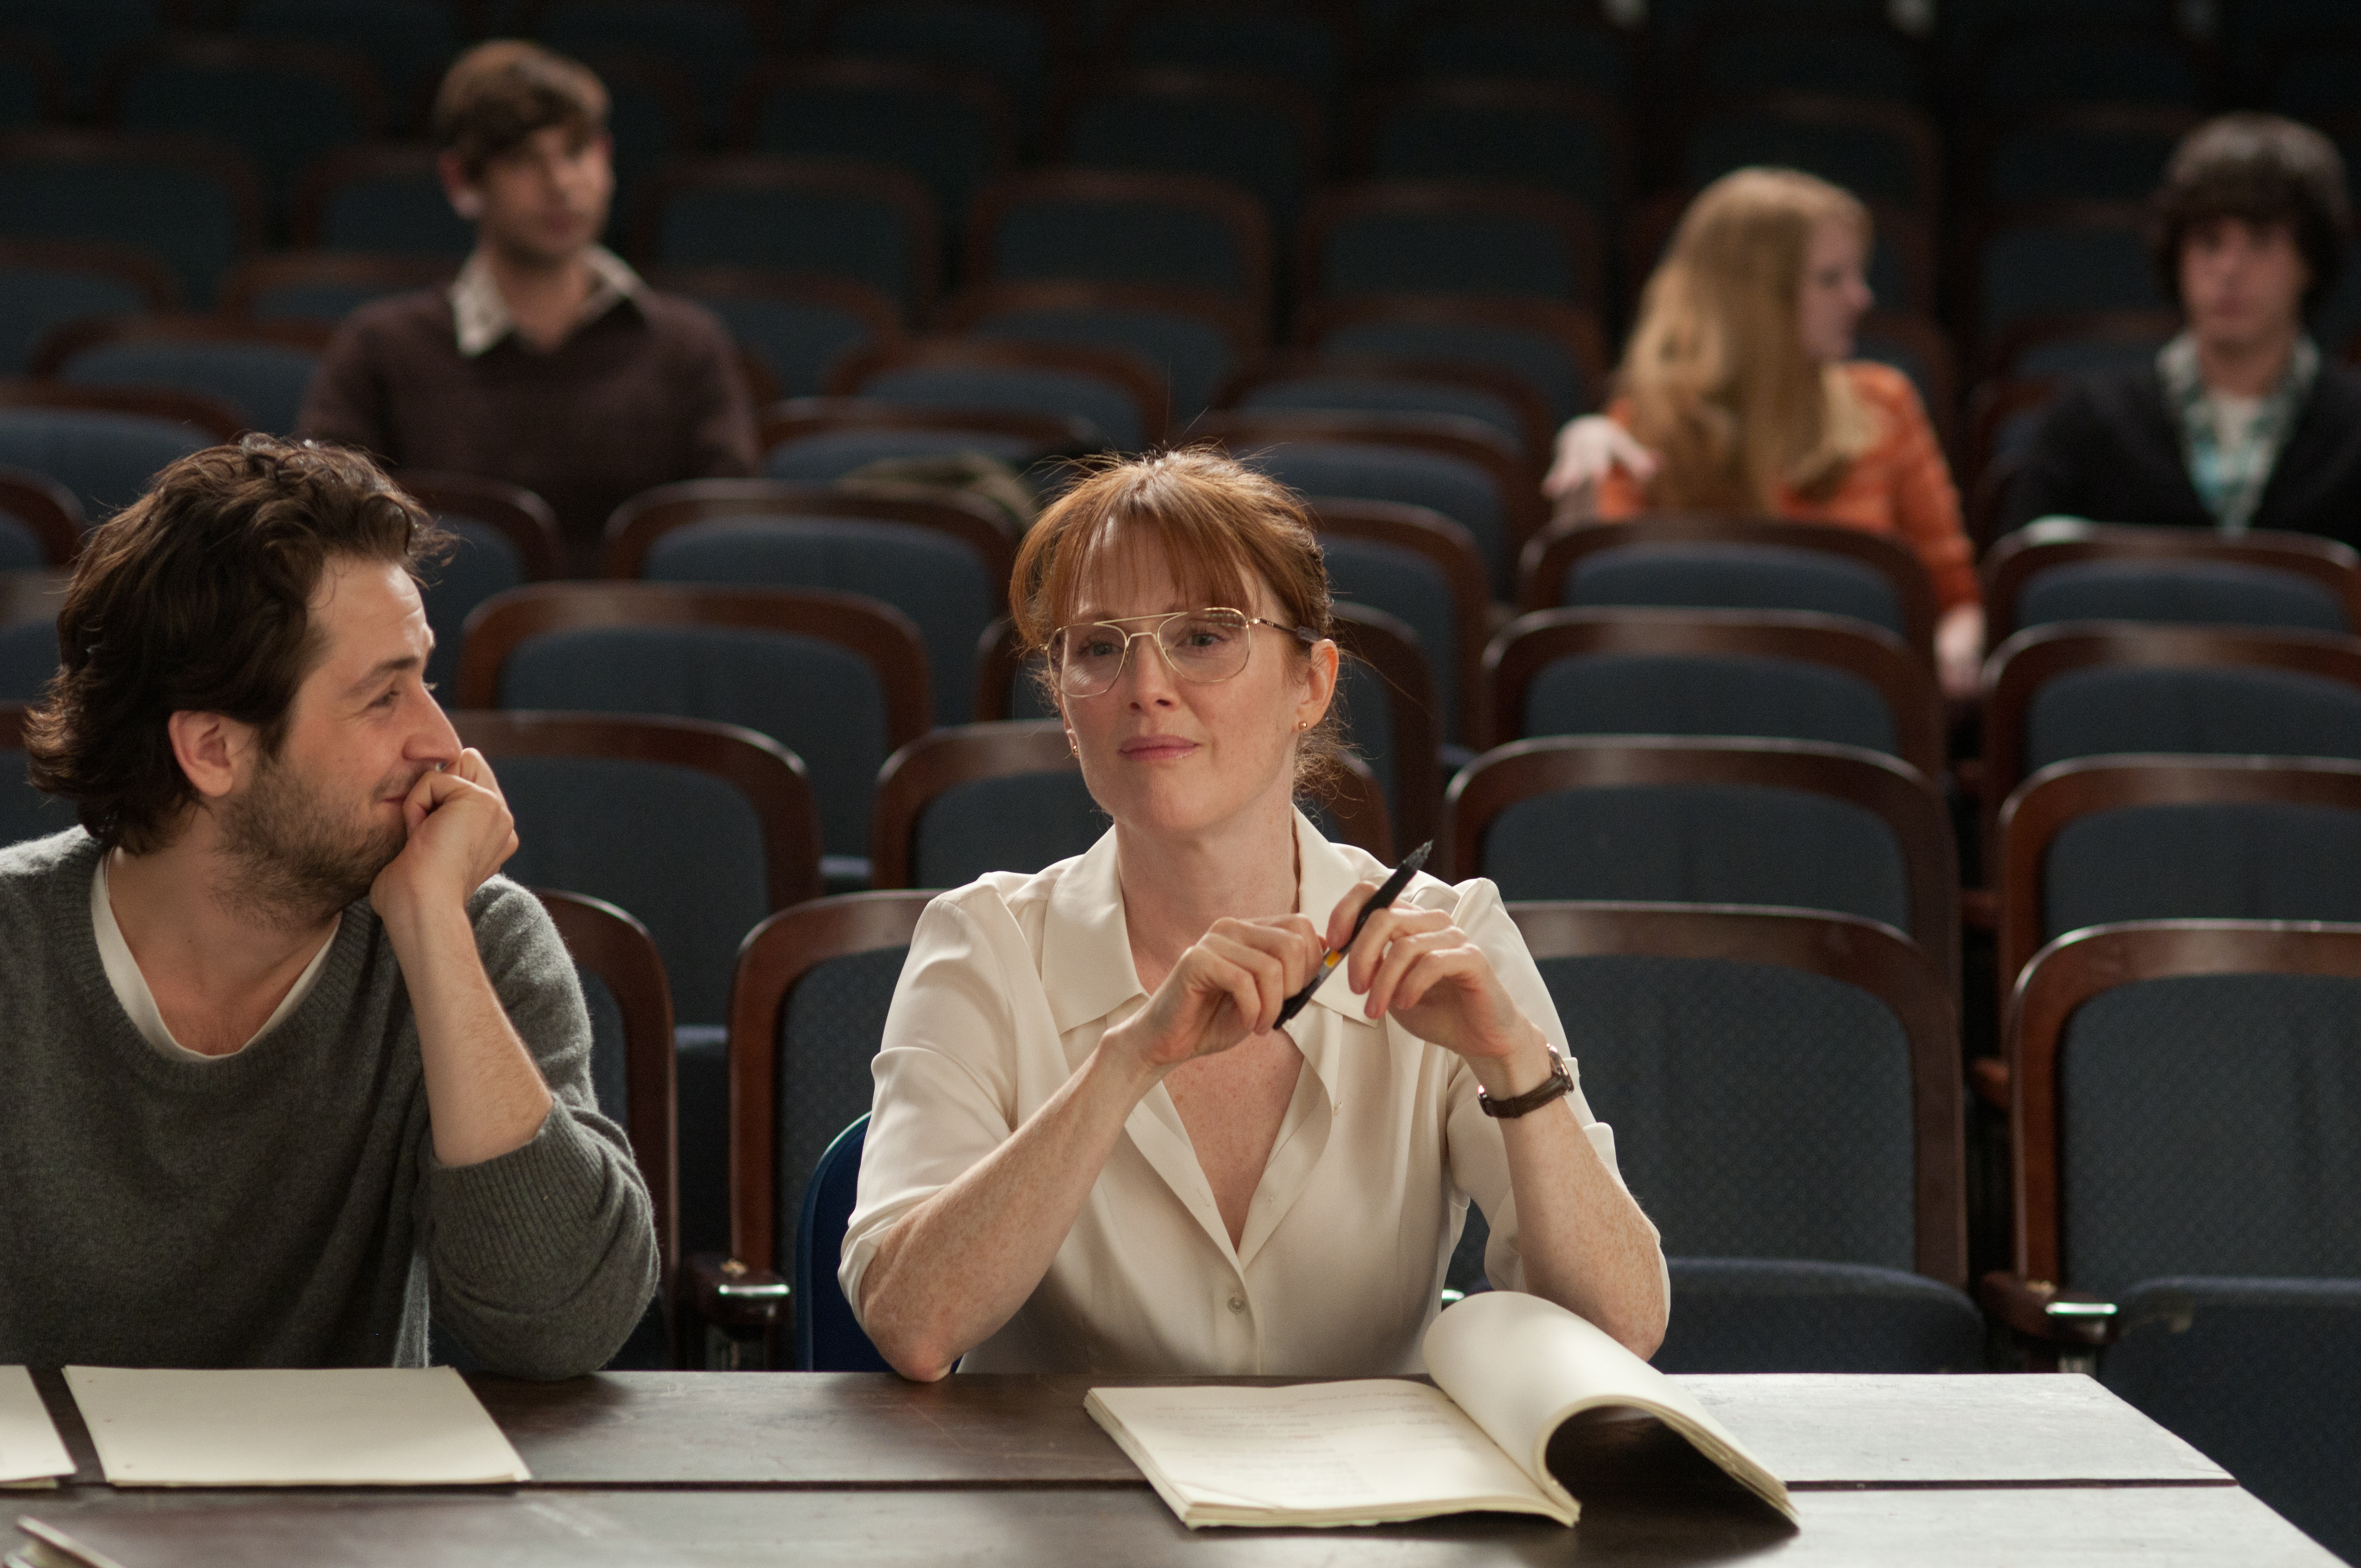 Interview: Julianne Moore and Michael Angarano on The English Teacher